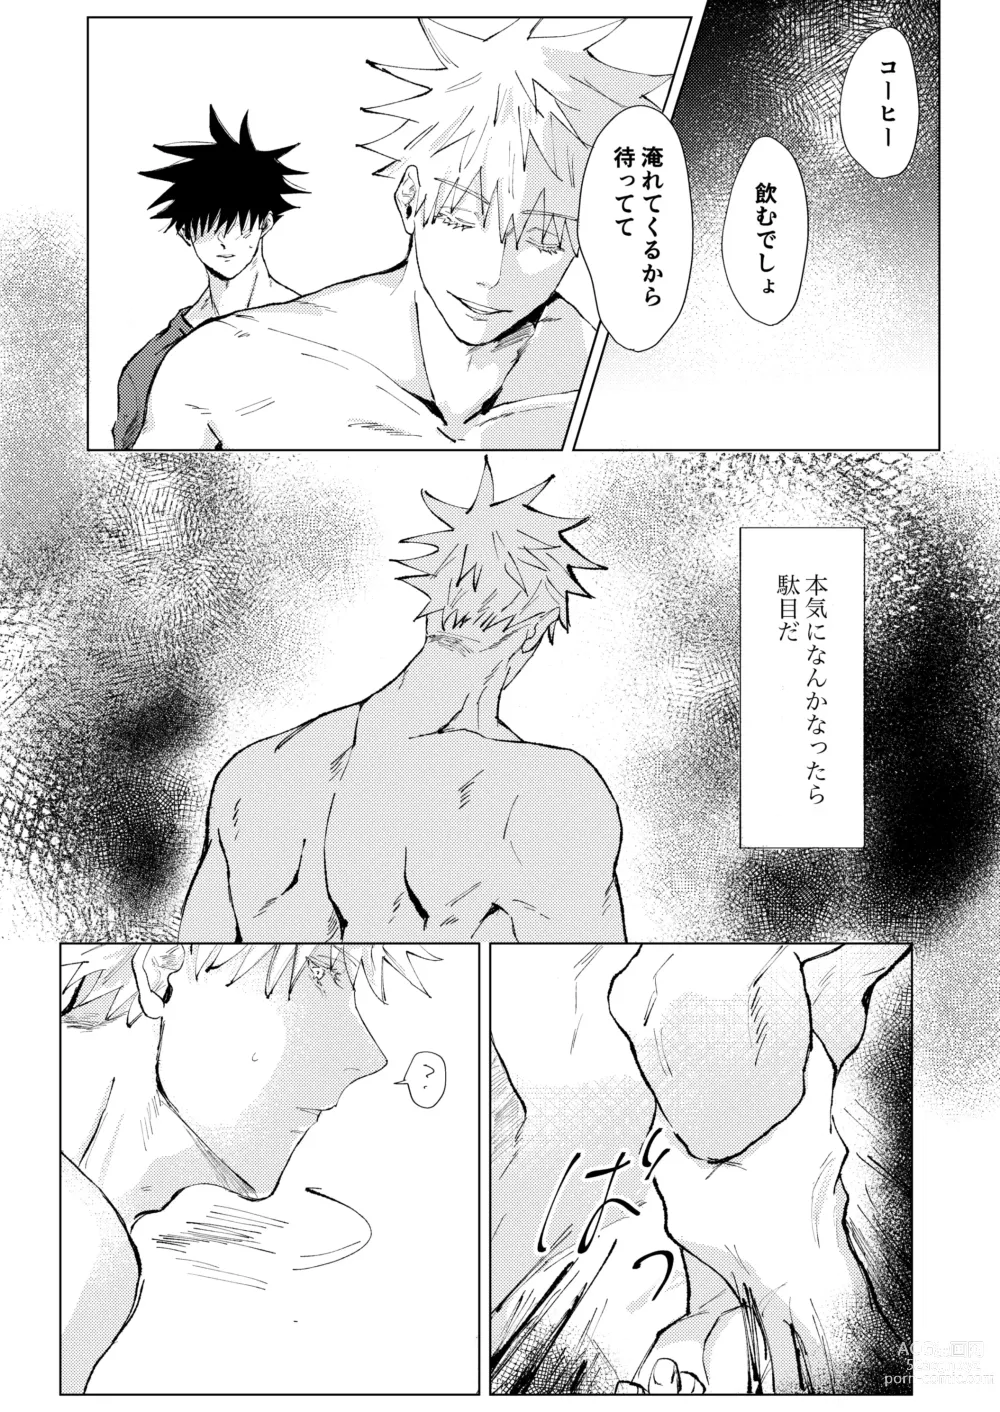 Page 9 of doujinshi Lack of...